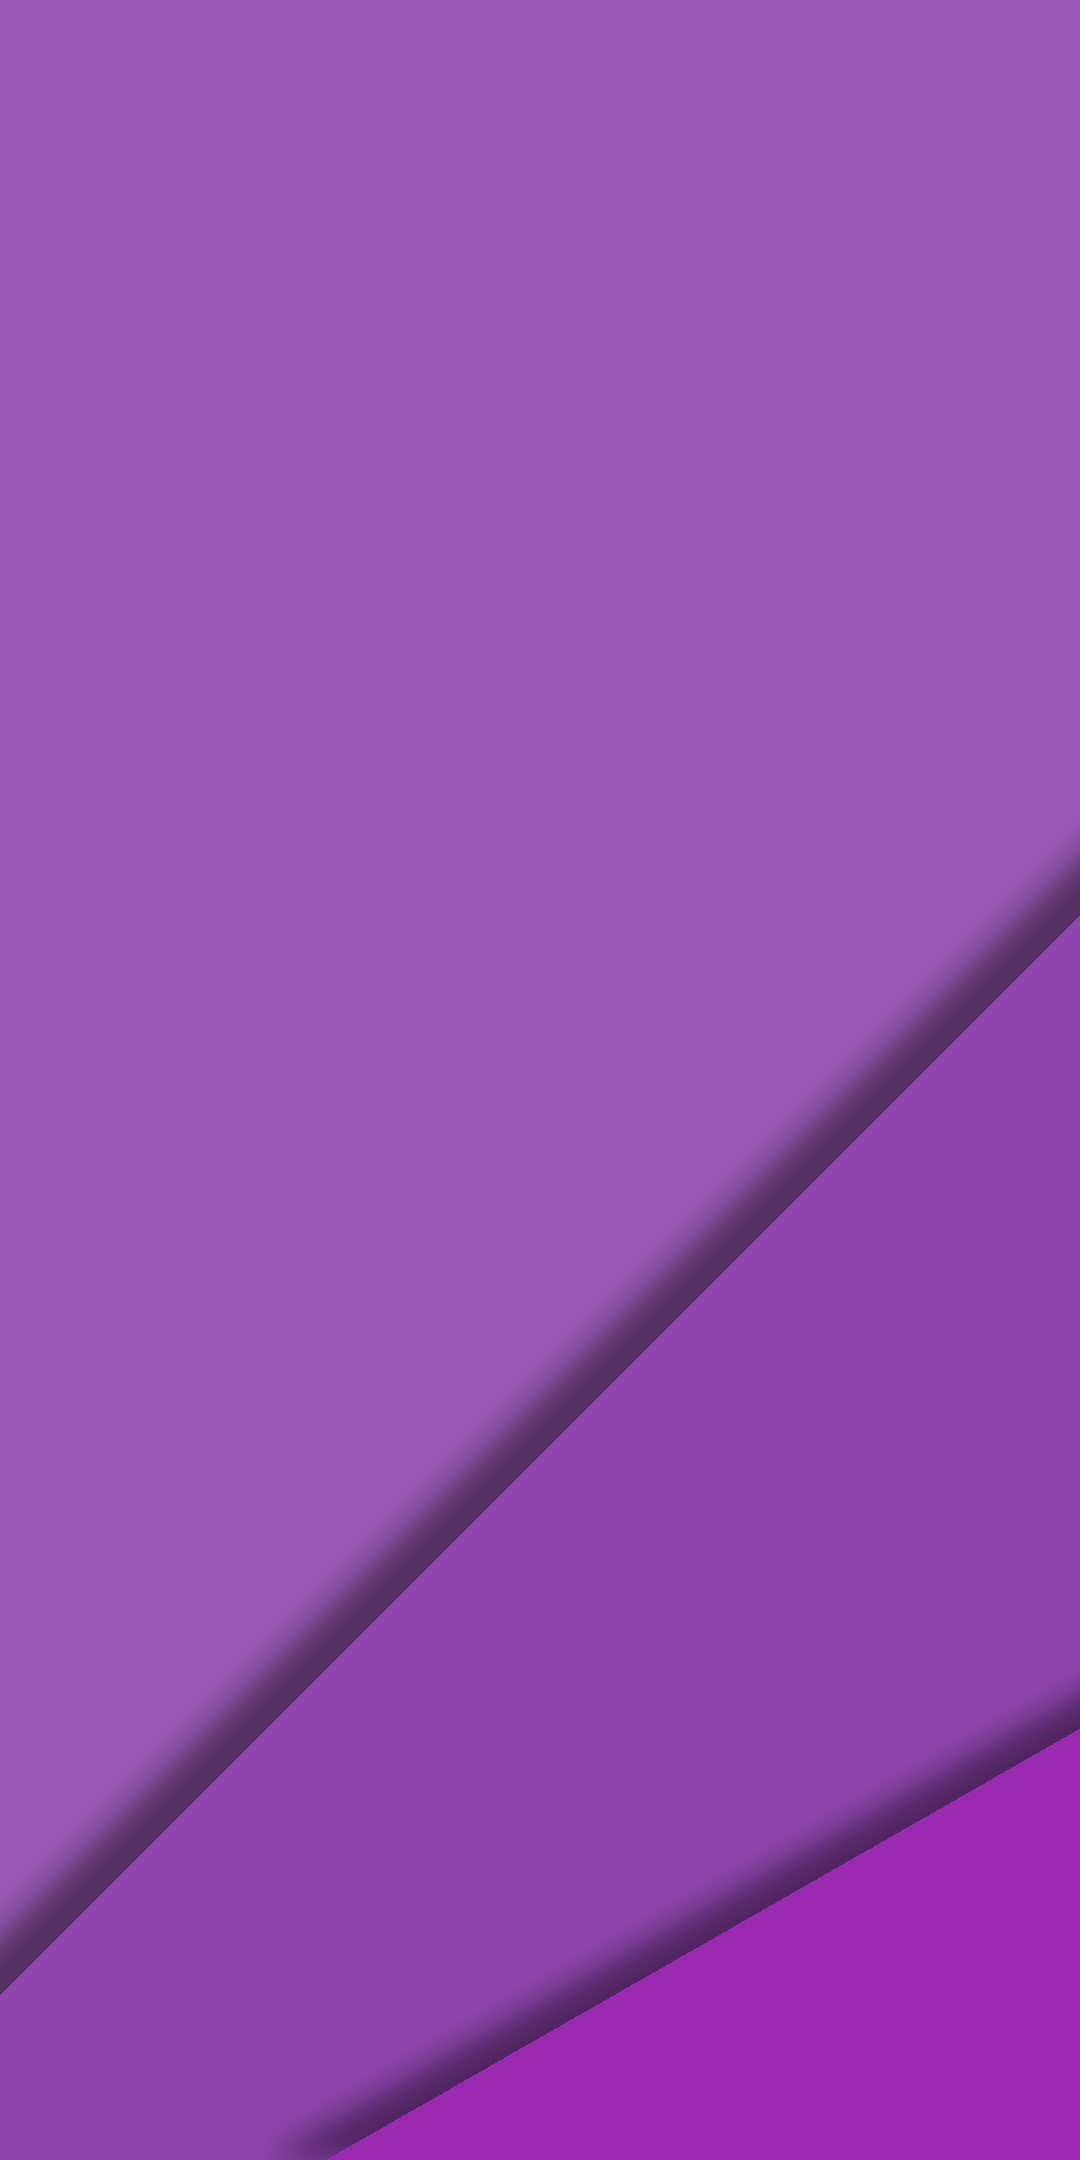 Abstract, purple sheds, material design, 1080x2160 wallpaper